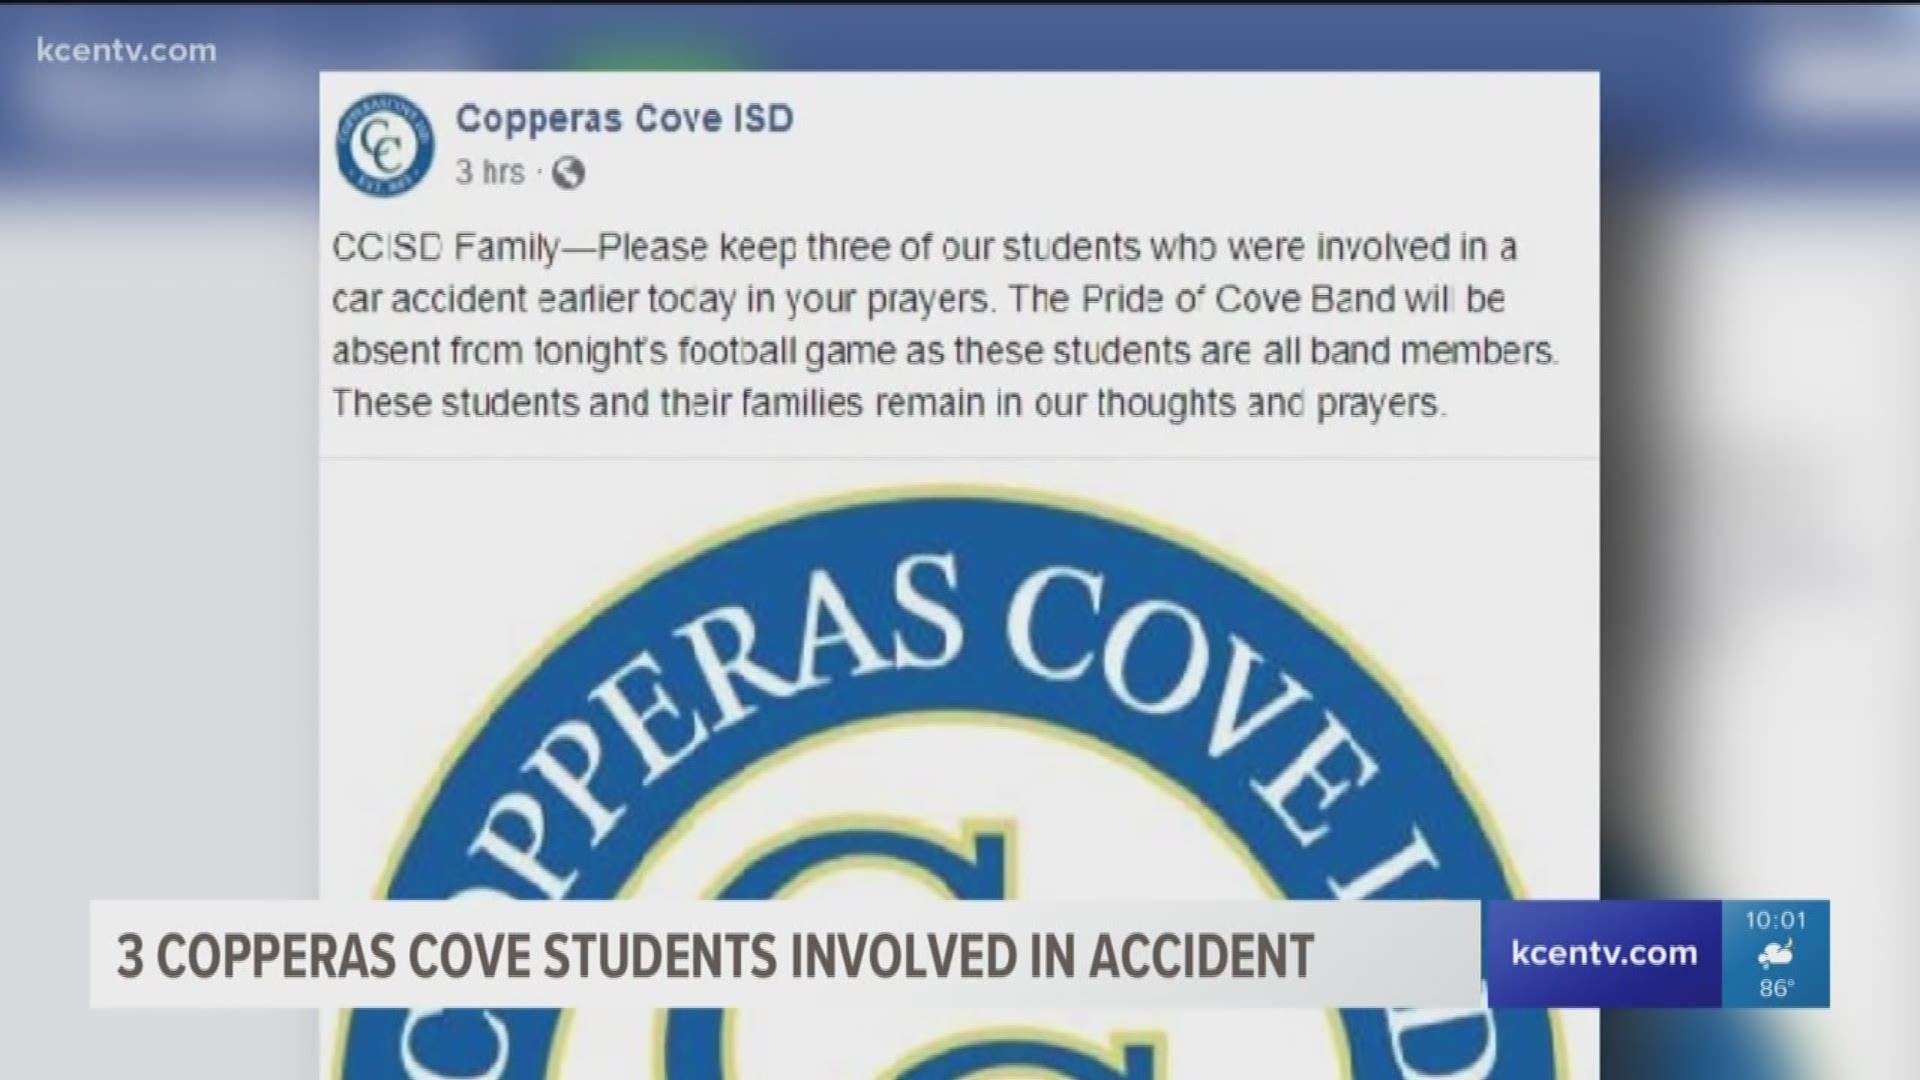 The Pride of Cove Band was absent from Friday night's game against Killeen after three of its members were involved in a car accident.